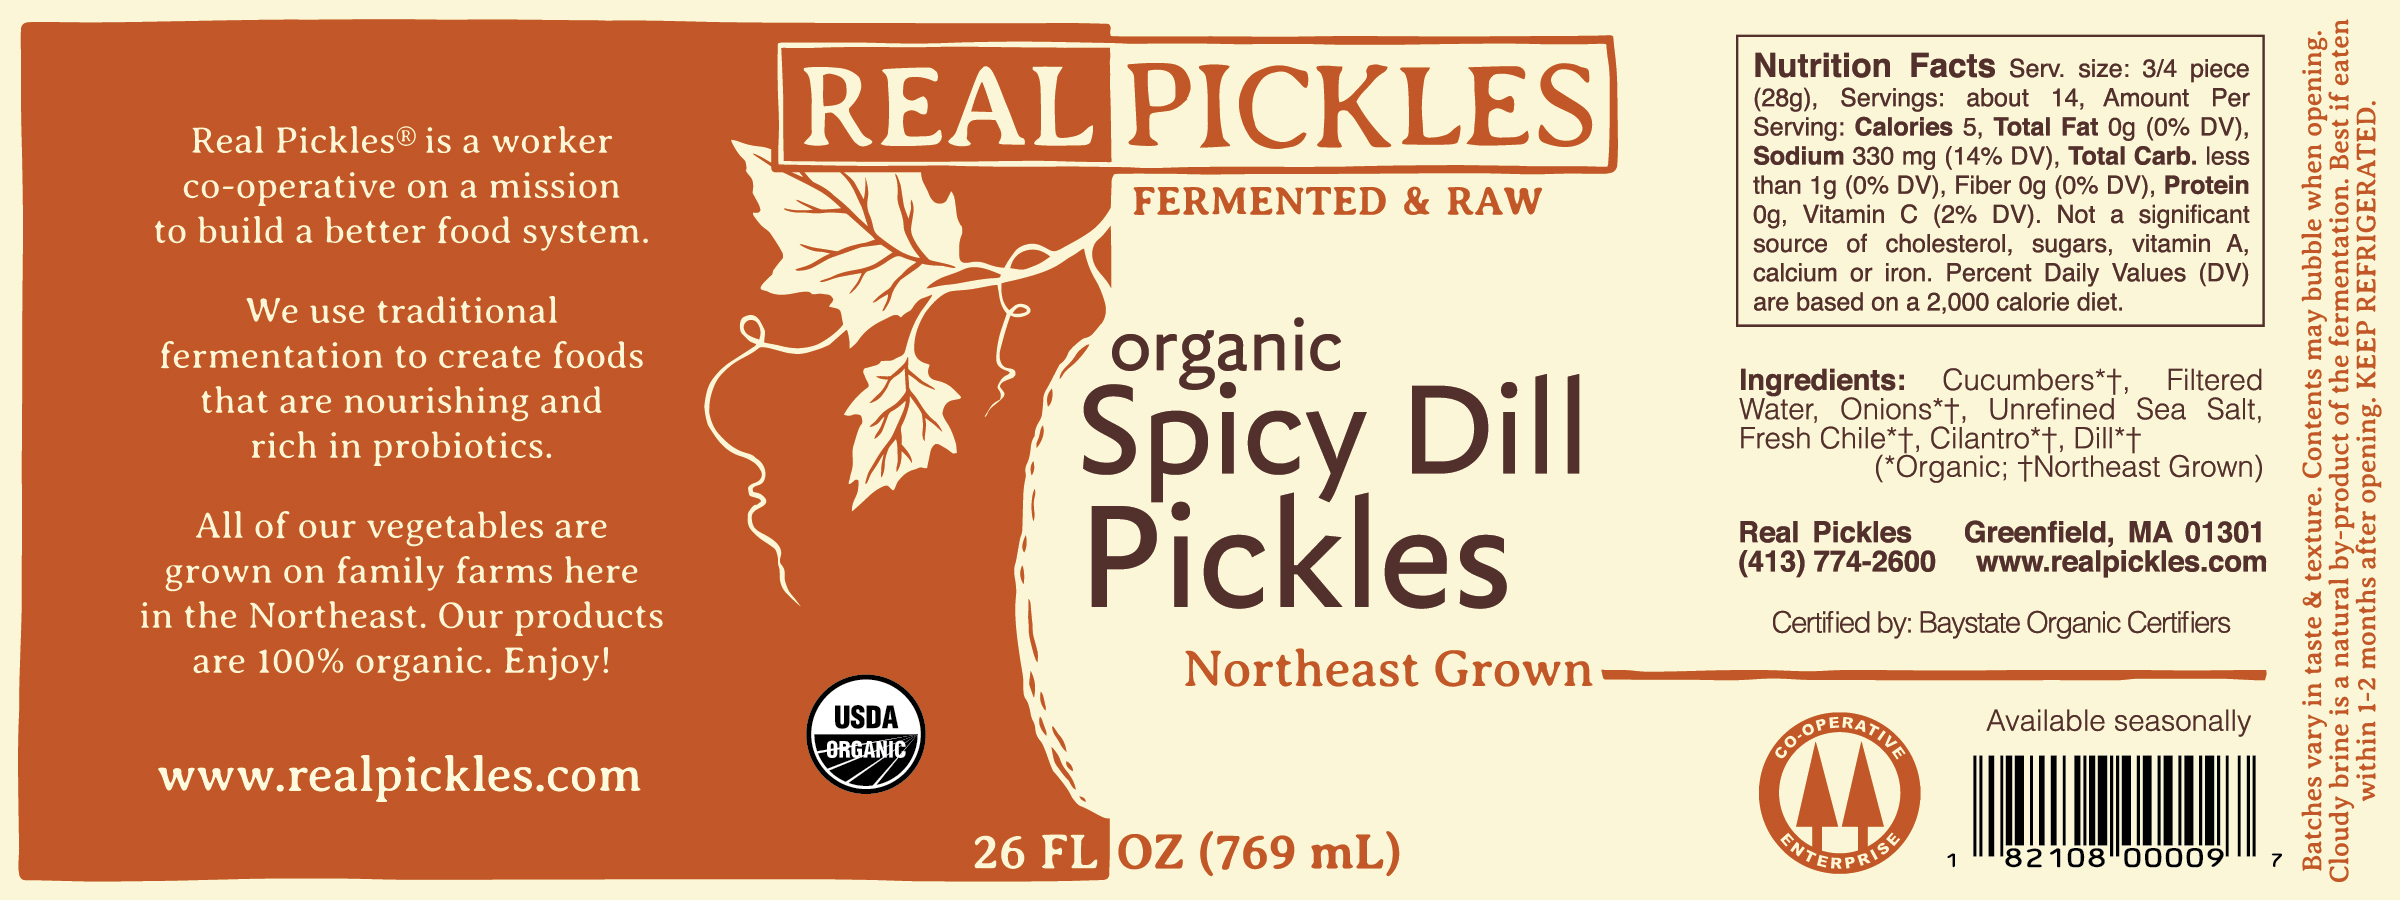 RP Spicy Dill Pickles v3 (outlines)-01